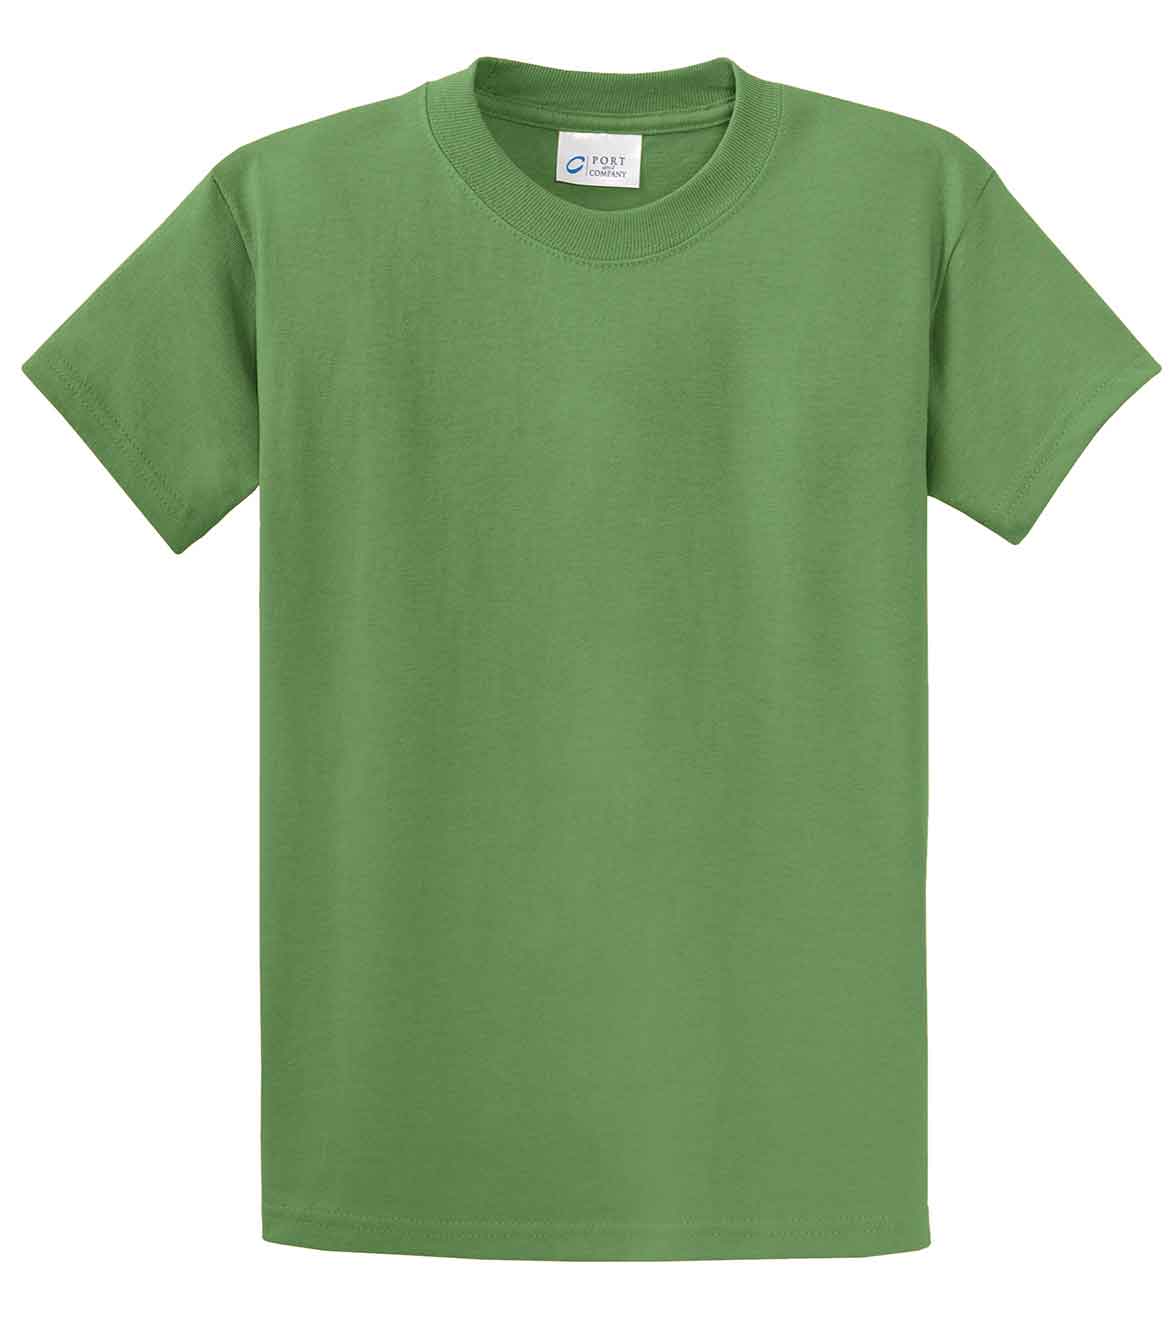 Port & Company 100% Cotton Essential T-Shirt Dill Green